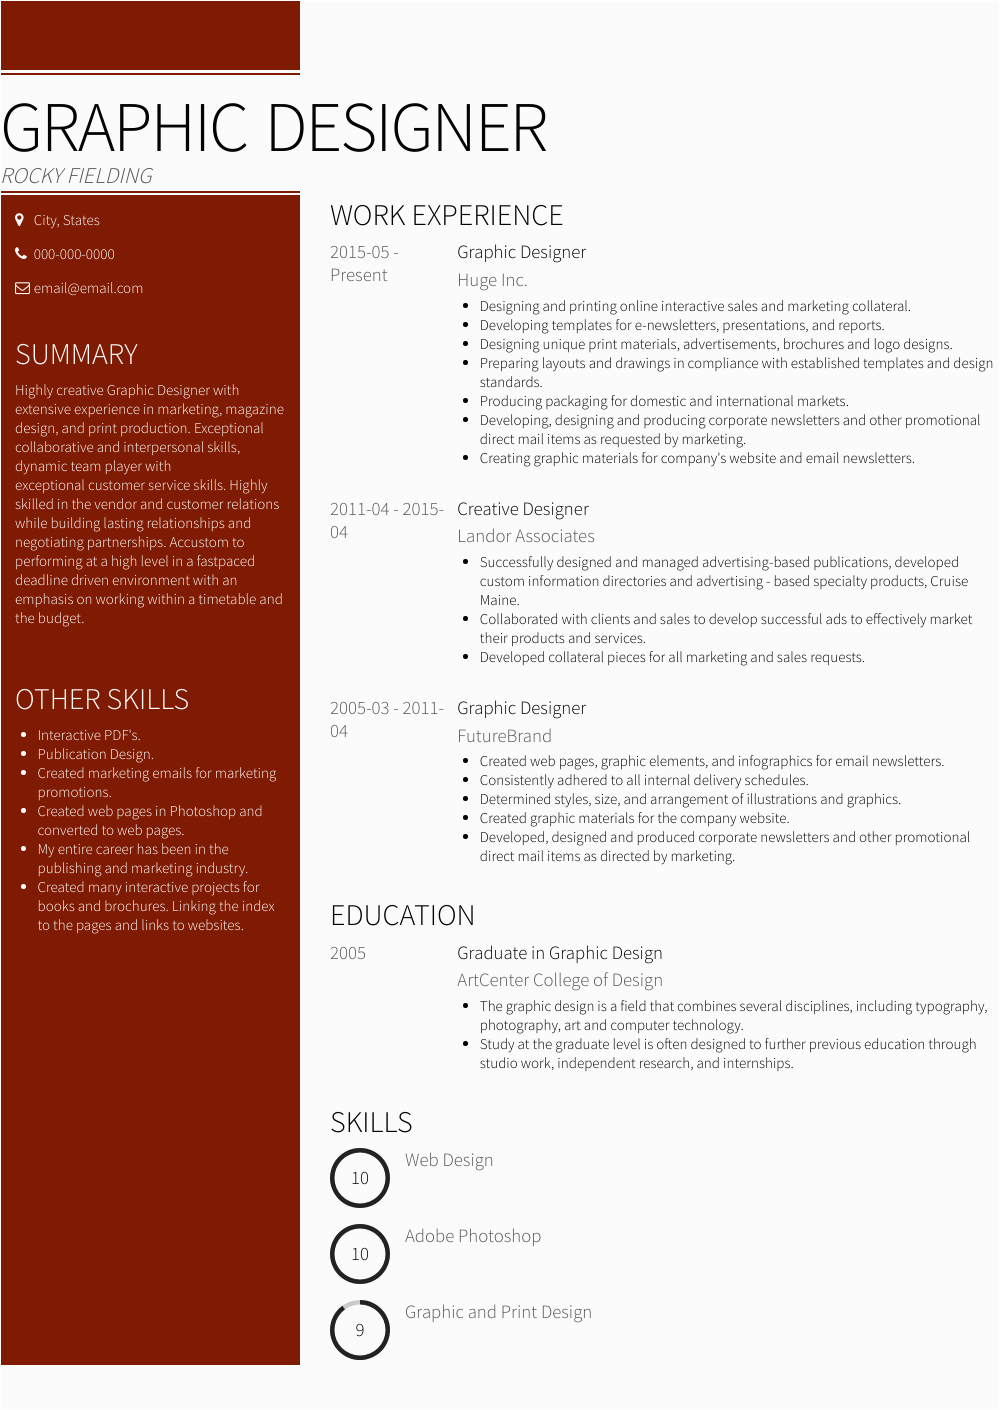 Free Sample Resume for Graphic Designer Graphic Design Resume Samples and Templates